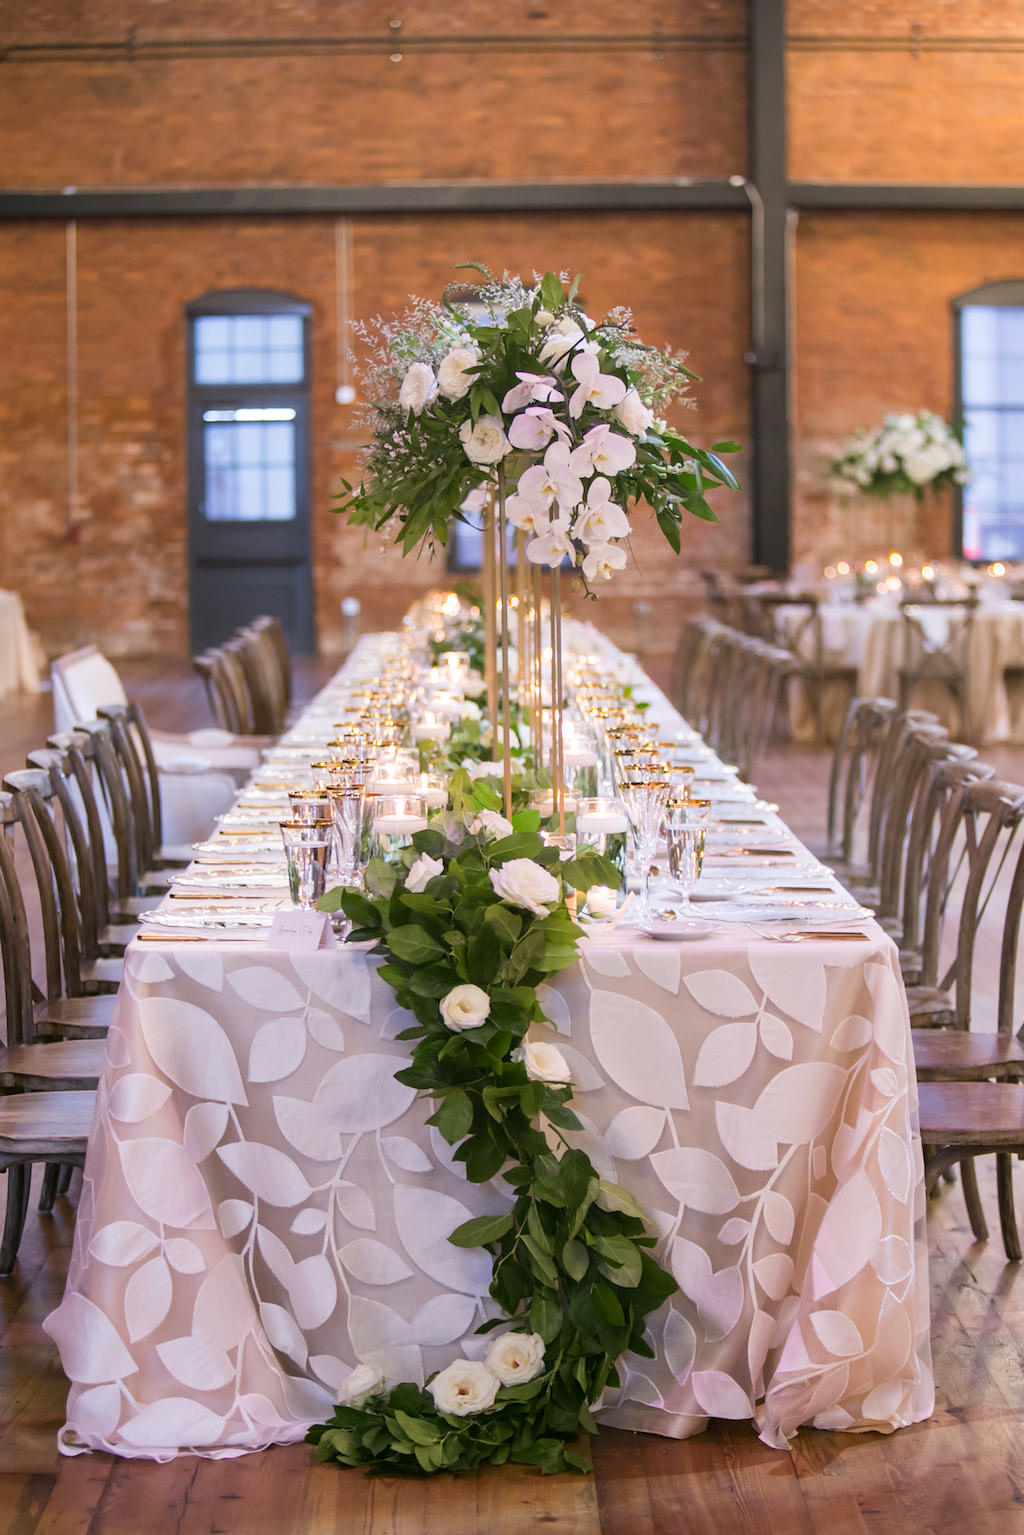 Elegant Modern Romantic Tuscan Inspired Wedding Reception Decor, Long Feasting Table with Floral Linen, Greenery and Ivory Floral Garland, Tall Gold Stand with Ivory White and Greenery Floral Centerpiece | Tampa Bay Wedding Photographer Carrie Wildes Photography | Tampa Bay Wedding and Event Rentals by Kate Ryan Event Rentals | Industrial Tampa Wedding Venue Armature Works